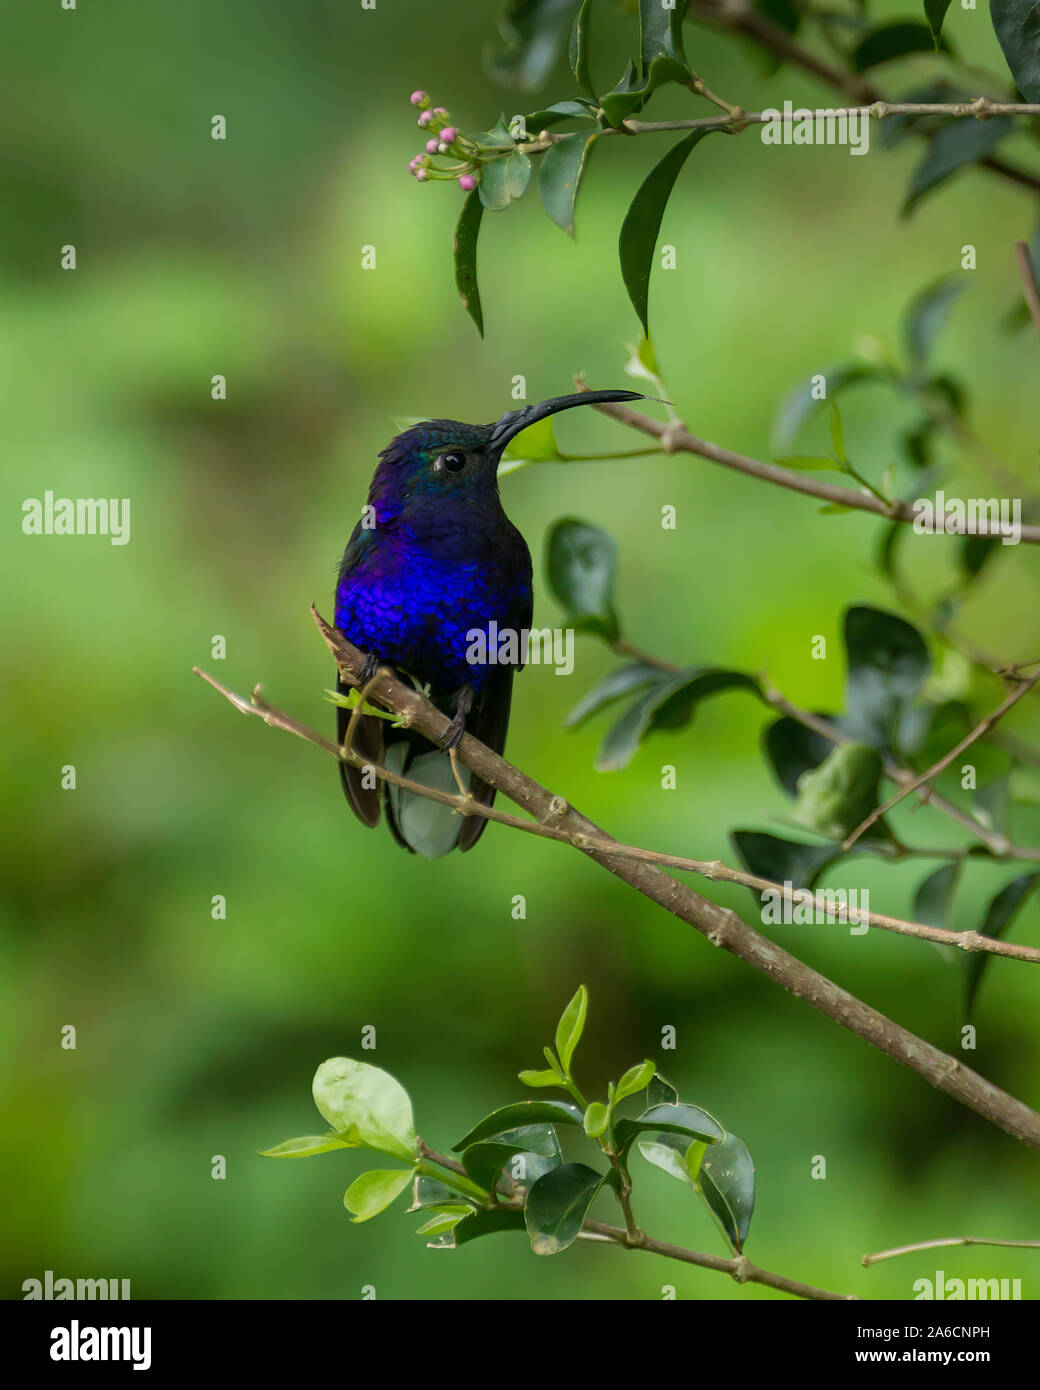 A male Violet Sabrewing Hummingbird, Campylopterus hemileucurus, perches on a branch in the rain forest of Costa Rica. Stock Photo